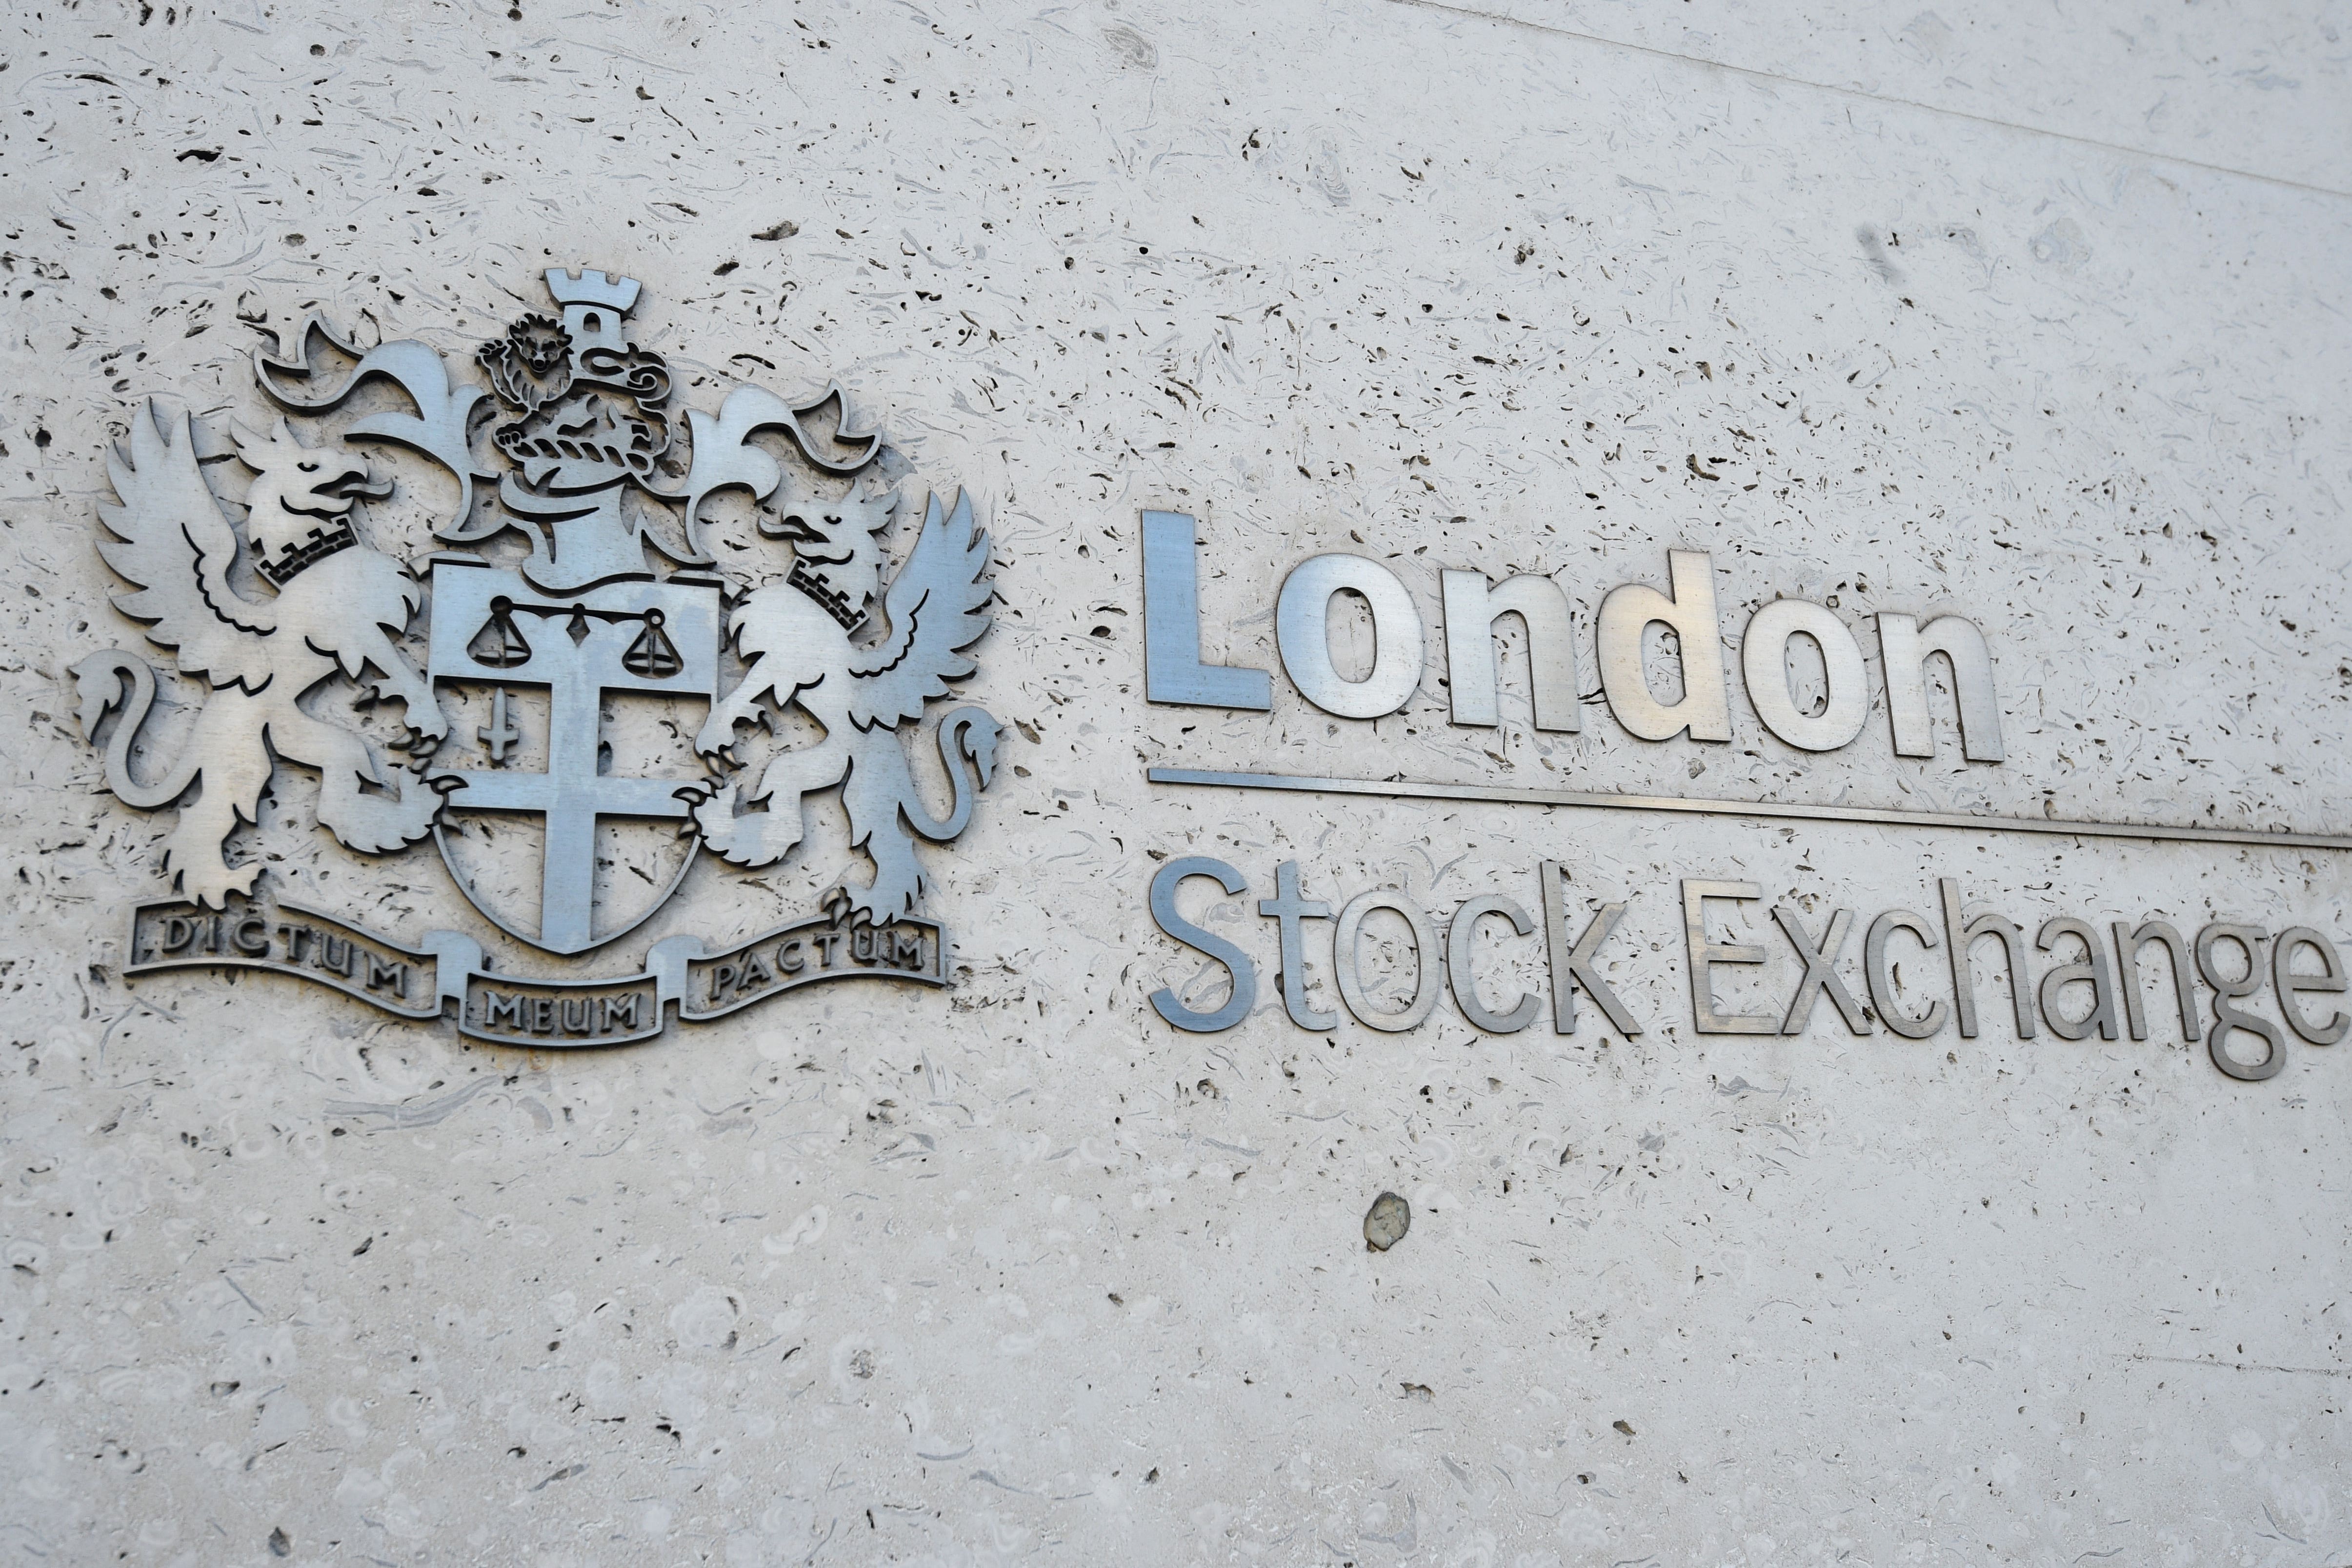 Britain’s financial watchdog has revealed plans to encourage more companies to list on UK stock markets